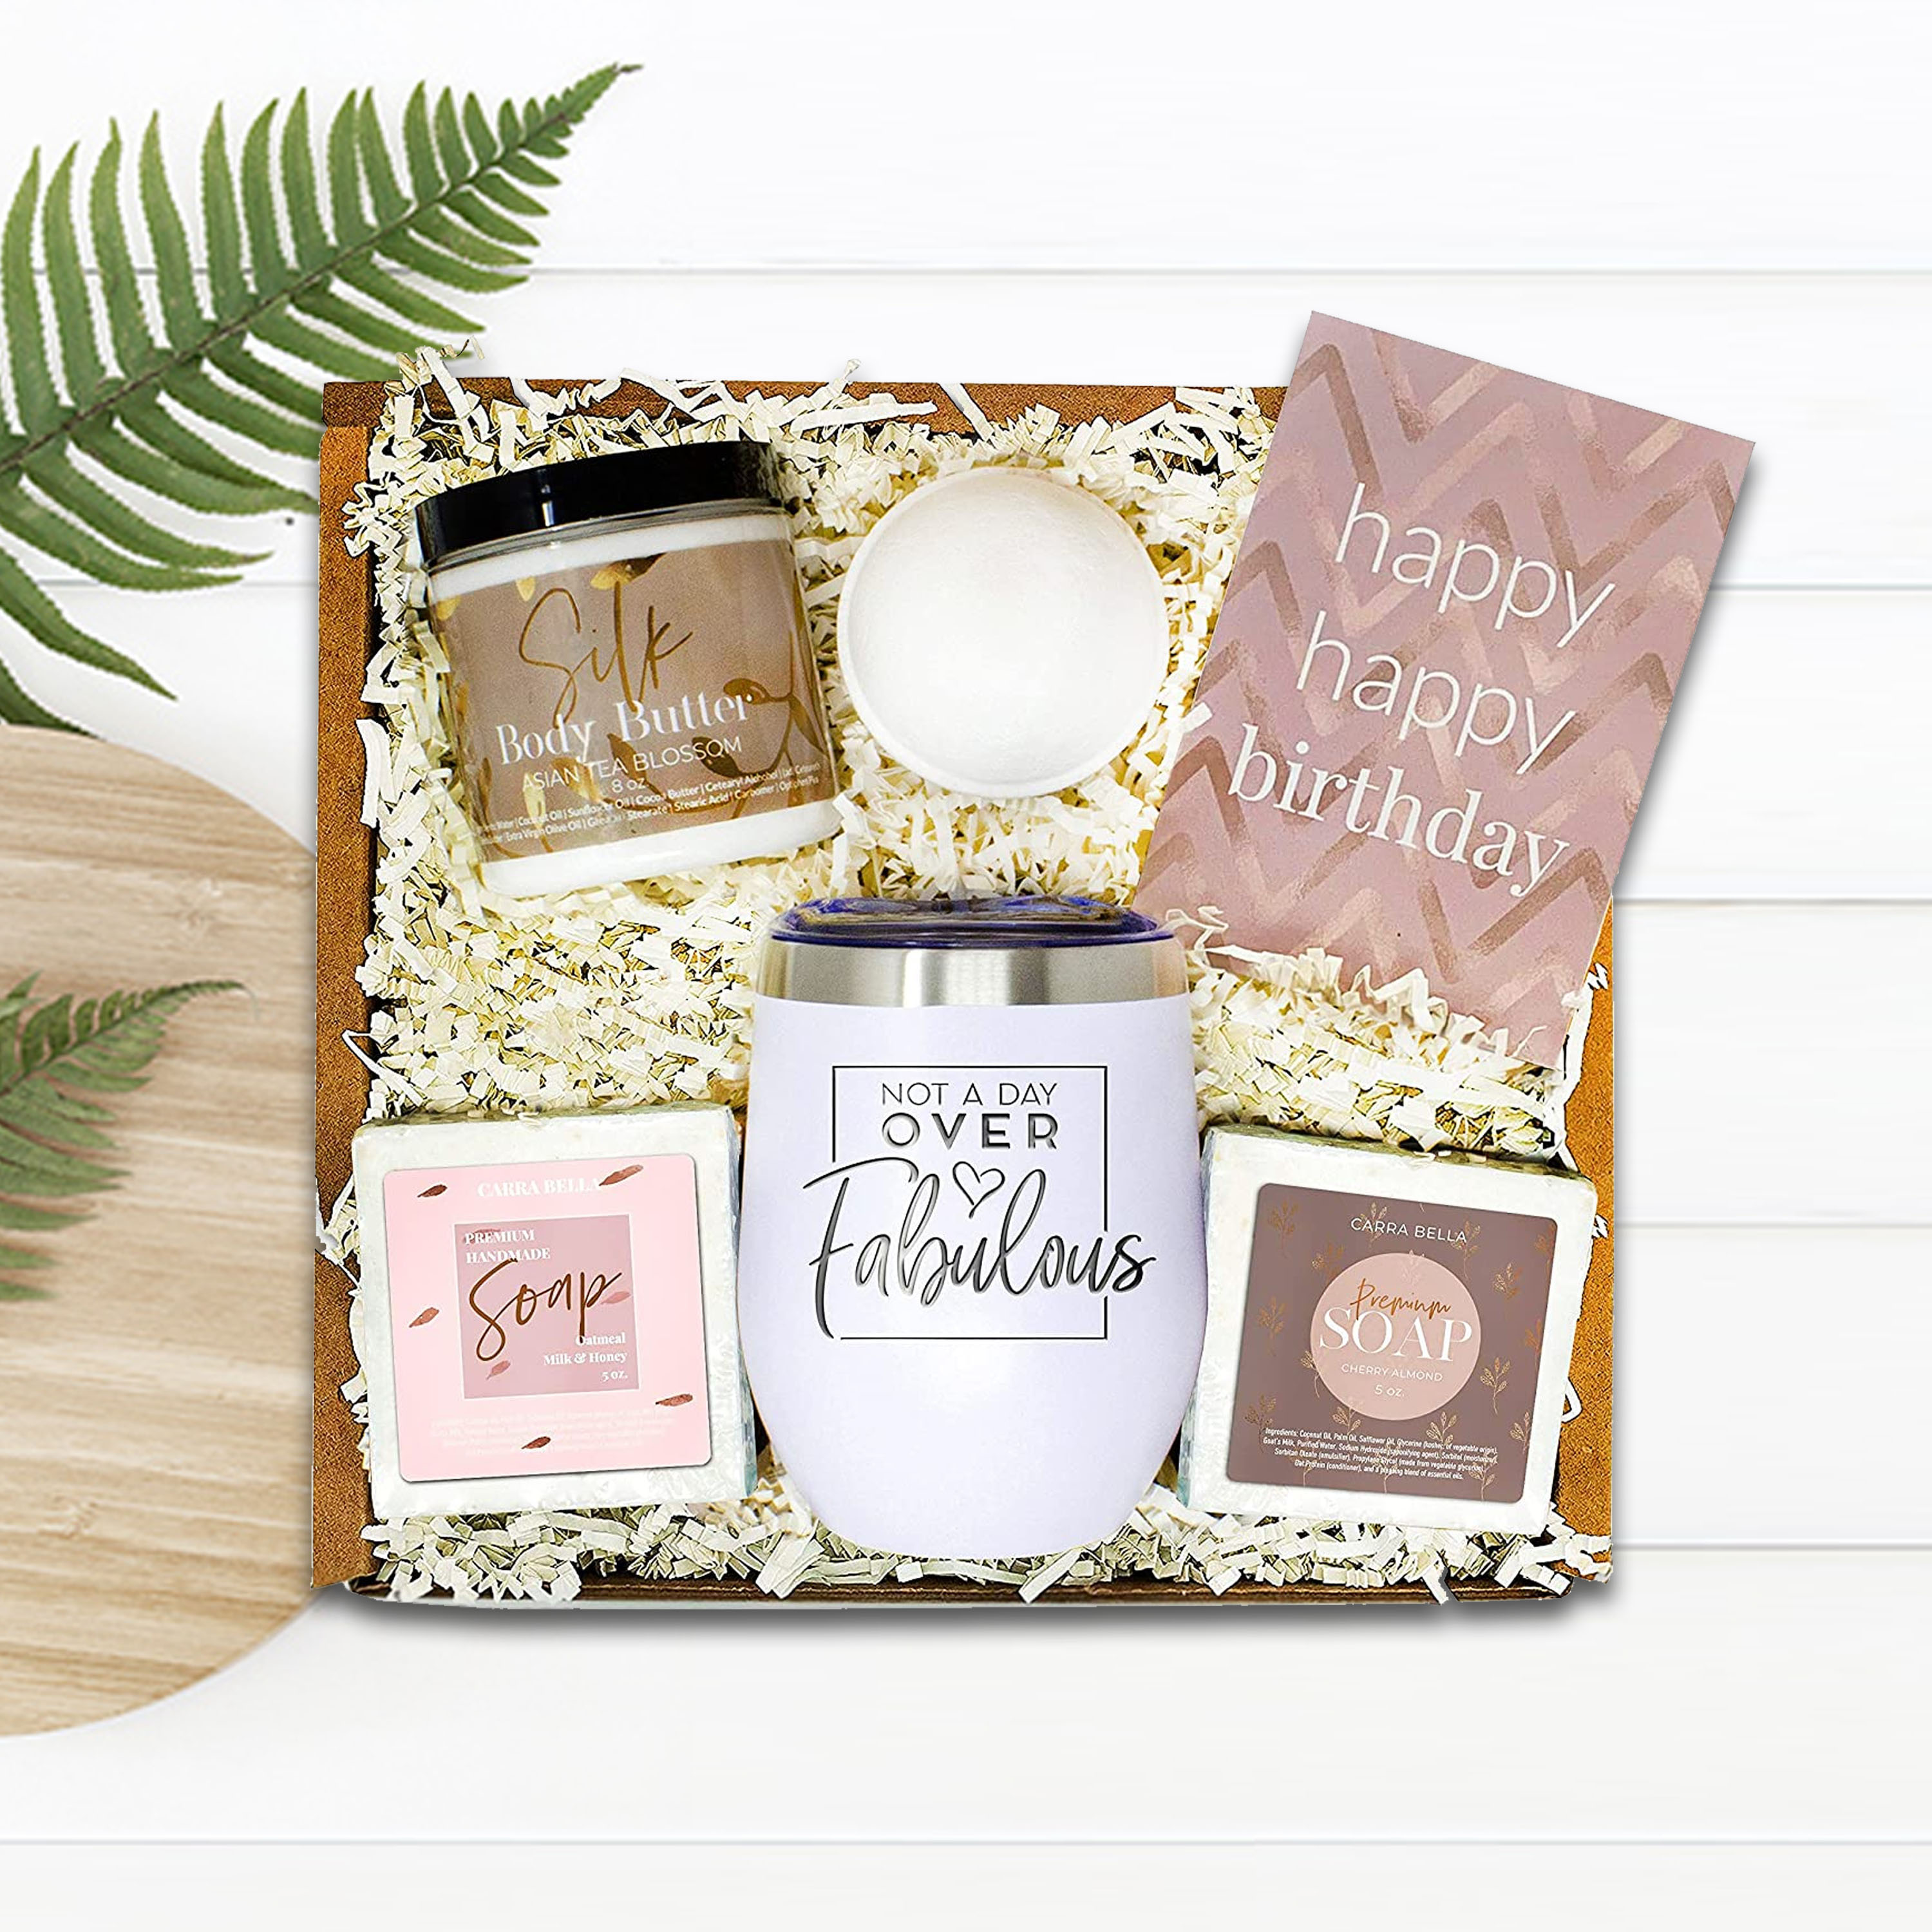 Sodilly’ Thoughtful Gift Boxes Bring Curated Themes, Amusing Ways to Send Gifts to Loved Ones